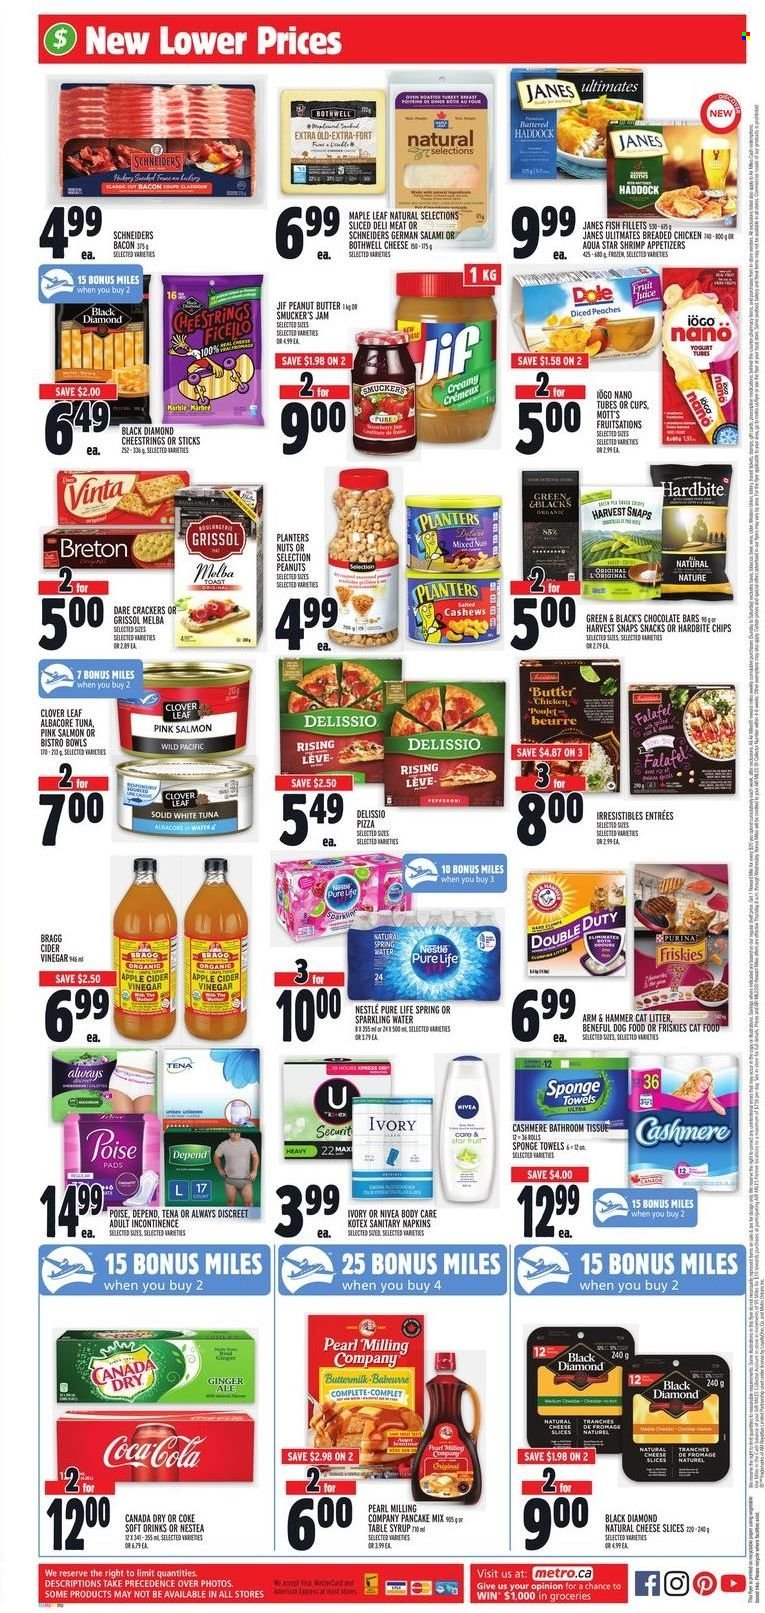 thumbnail - Metro Flyer - January 20, 2022 - January 26, 2022 - Sales products - ginger, Dole, Mott's, fish fillets, haddock, fish, shrimps, pizza, fried chicken, pancakes, bacon, salami, sliced cheese, string cheese, yoghurt, Clover, snack, crackers, chocolate bar, ARM & HAMMER, Harvest Snaps, apple cider vinegar, fruit jam, peanut butter, syrup, Jif, cashews, Planters, Canada Dry, Coca-Cola, sparkling water, napkins, bath tissue, sanitary napkins, Always Discreet, Kotex, sponge, cup, towel, cat litter, animal food, cat food, dog food, Purina, Friskies, Nestlé, Nivea, chips. Page 12.